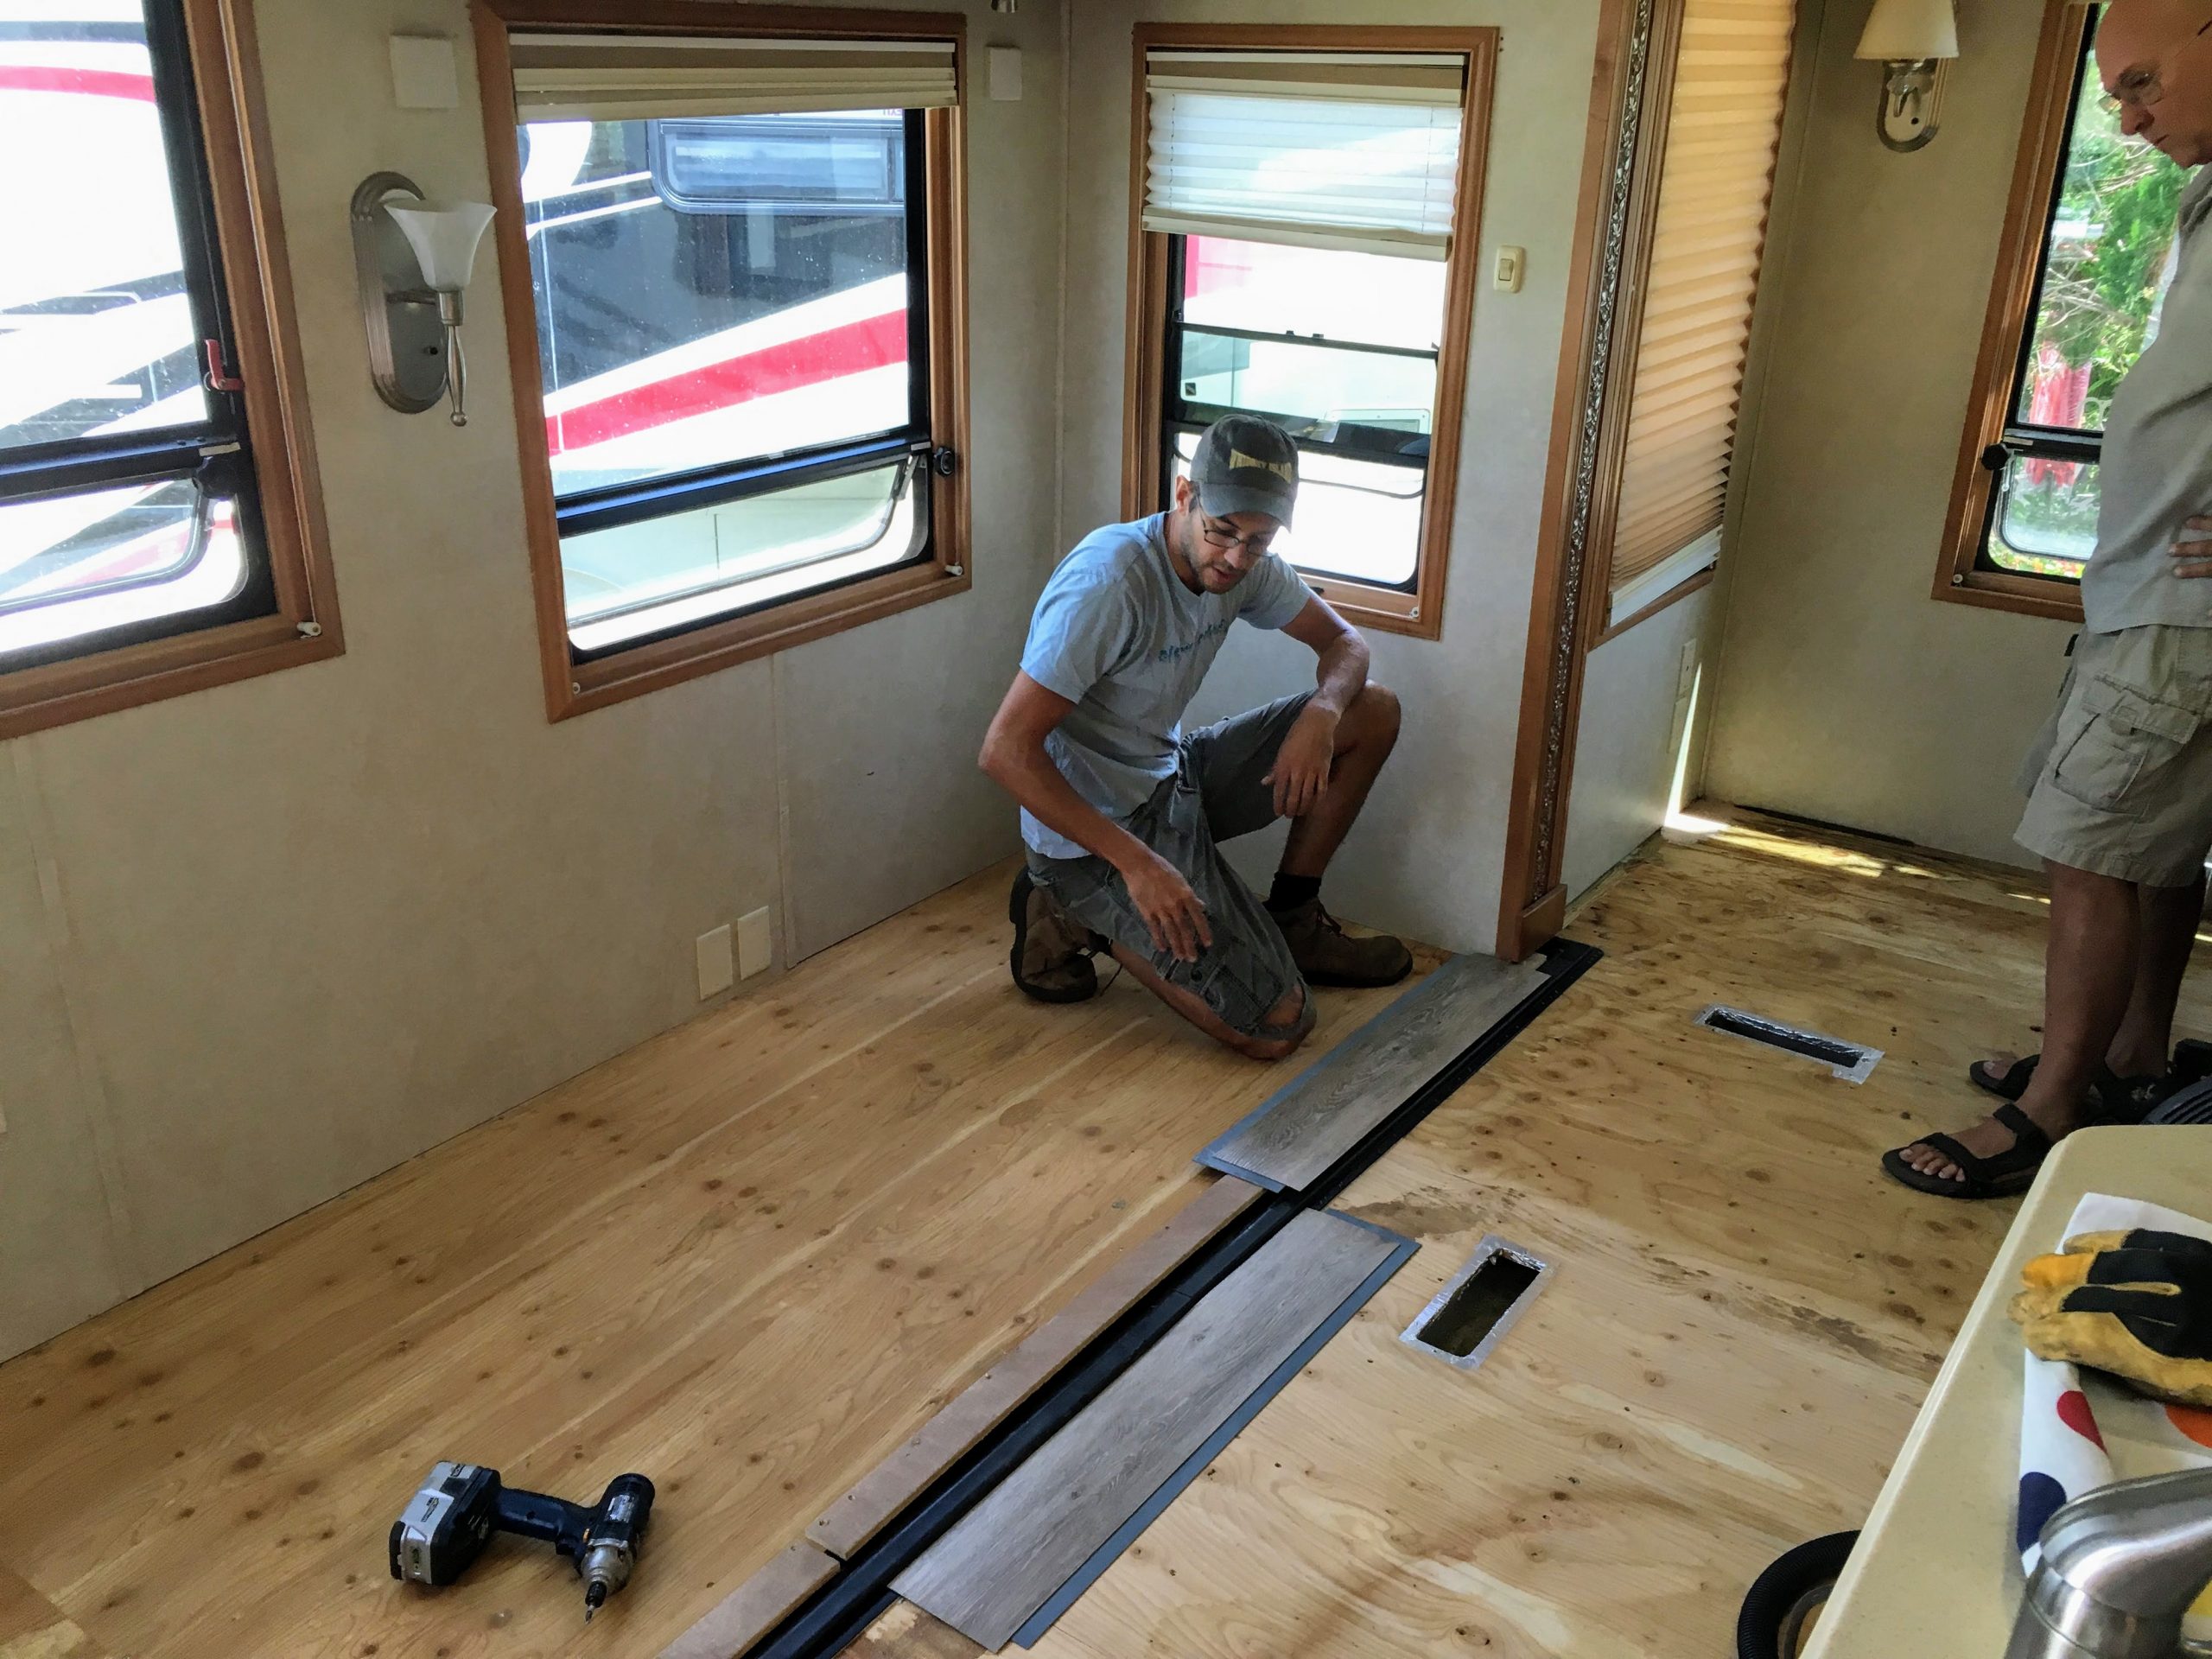 Diy Rv Flooring With A Flush Slideout, How To Install Laminate Flooring In A Rv With Slide Outs